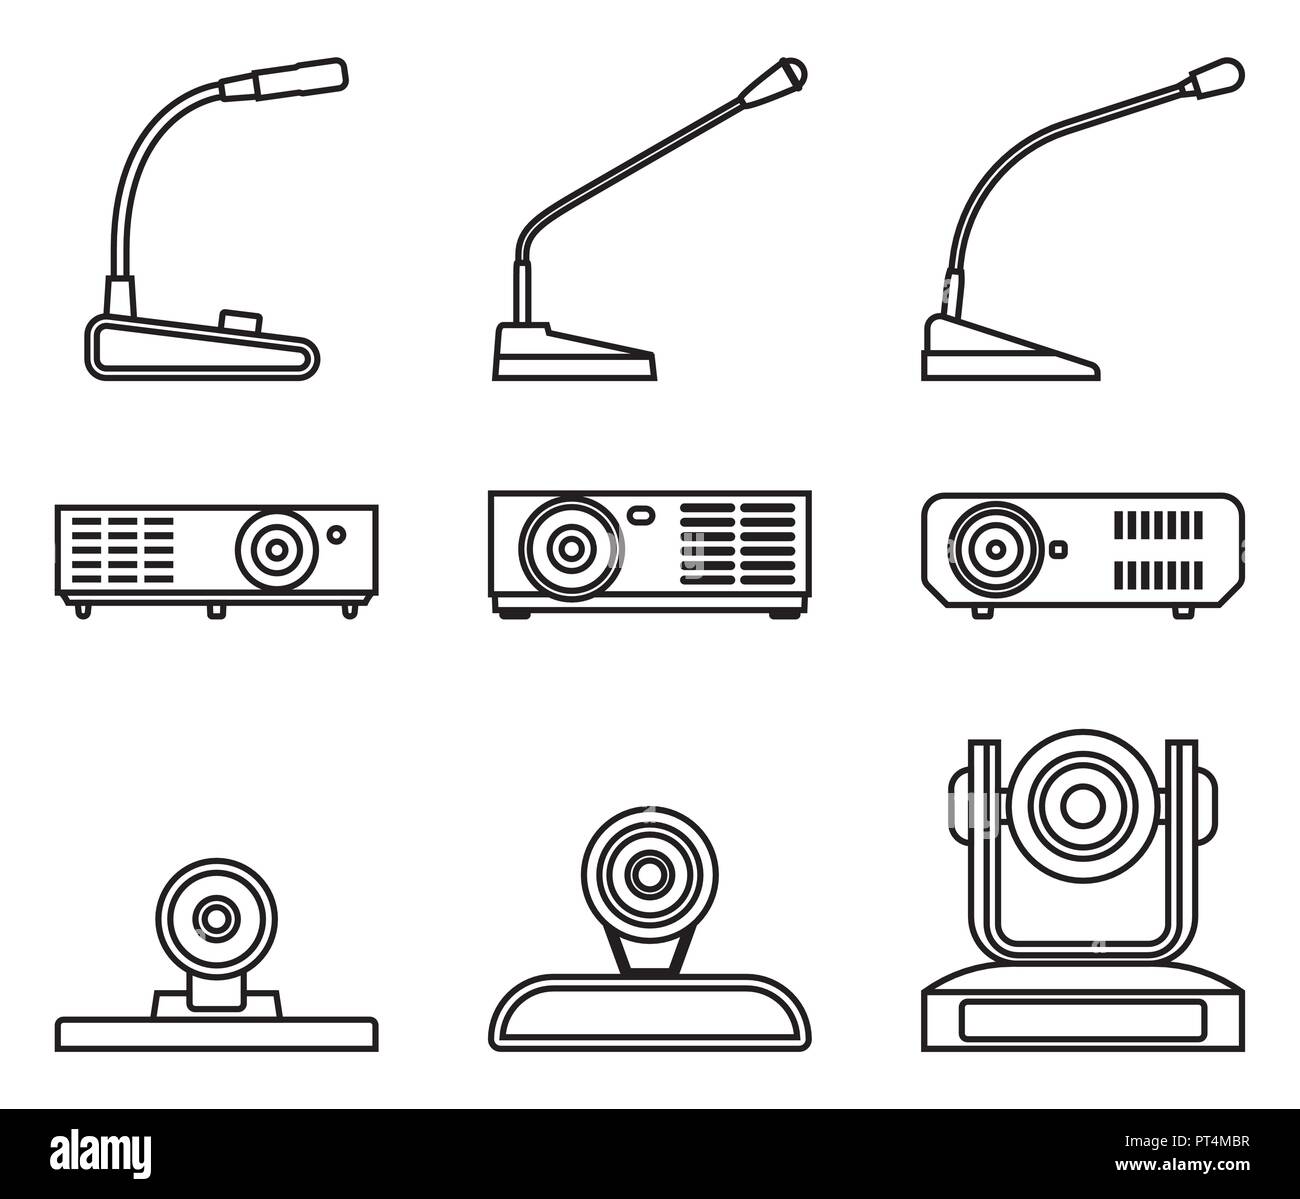 Conference equipment icon set. Vector thin line Stock Vector